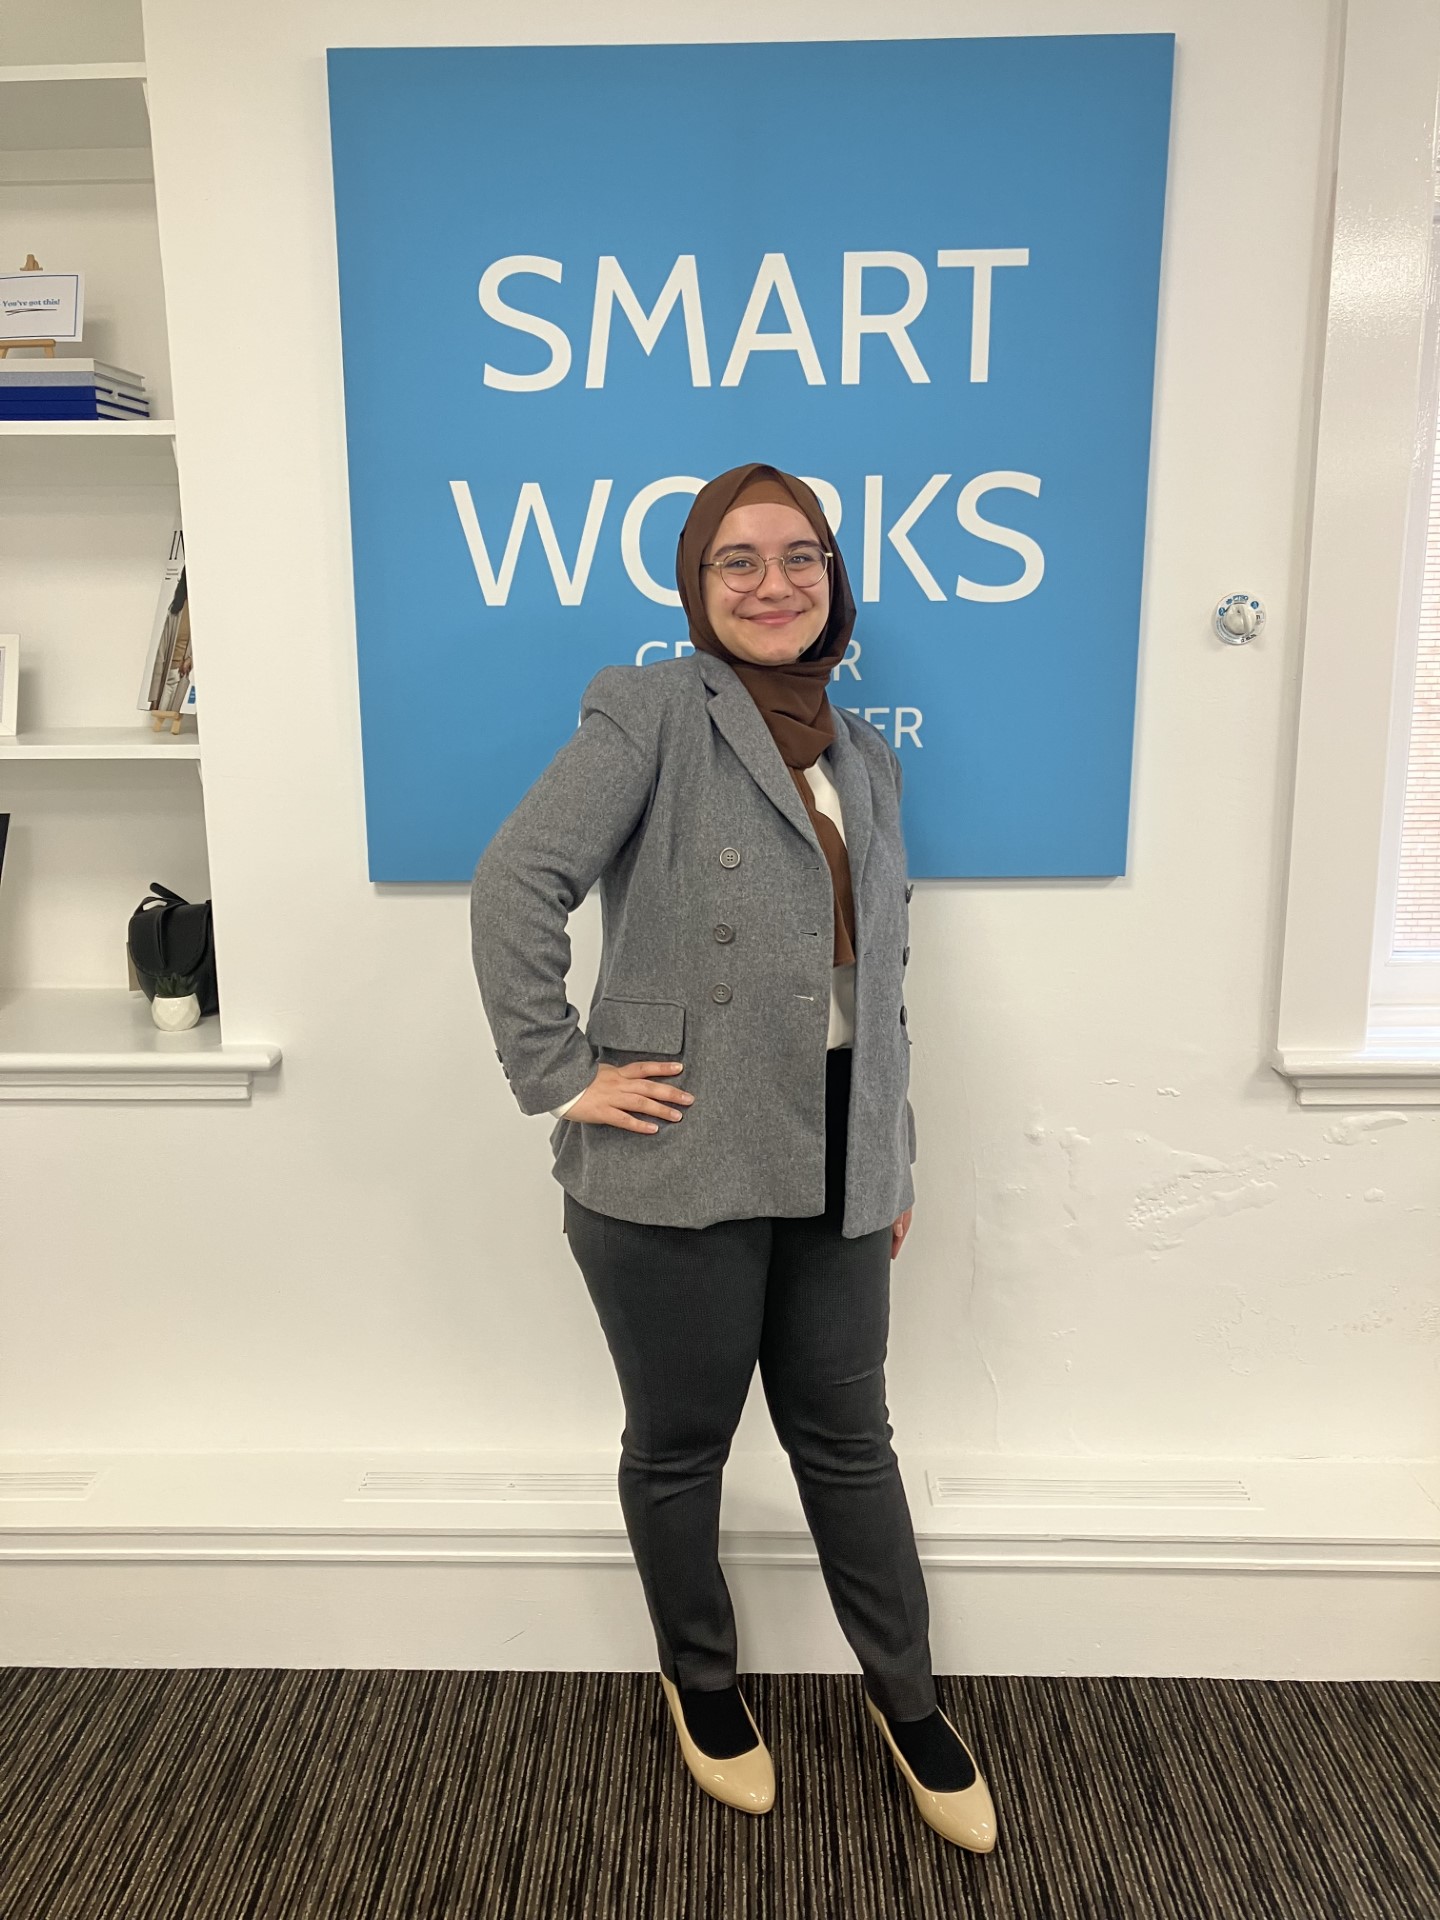 She got the job! From career coaching to a successful interview through the Smart Works service image